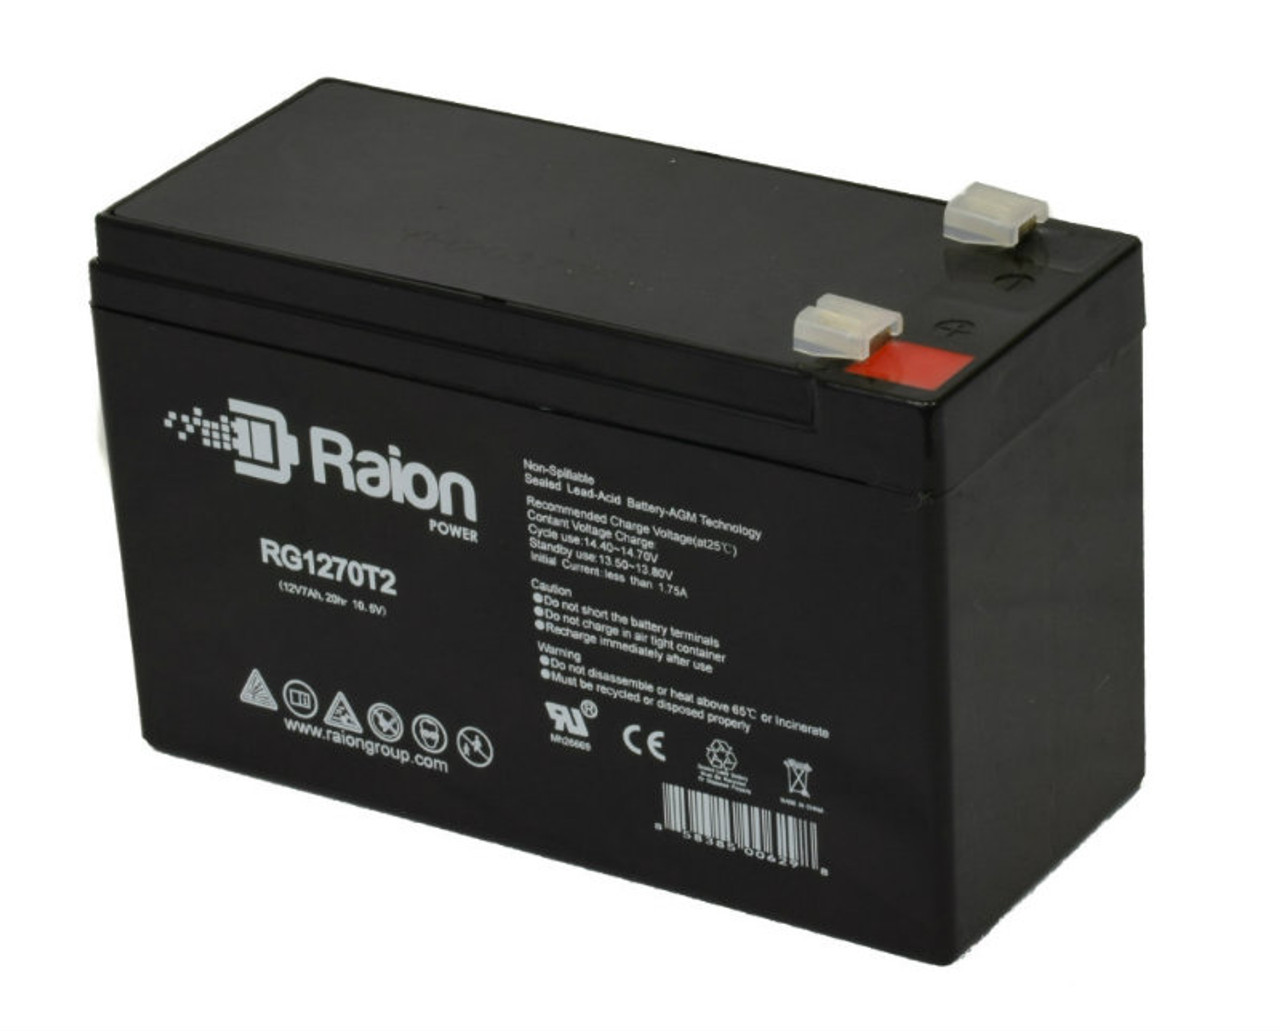 Raion Power RG1270T1 12V 7Ah Non-Spillable Replacement Battery for Fengri 6-FM-7.0 F1